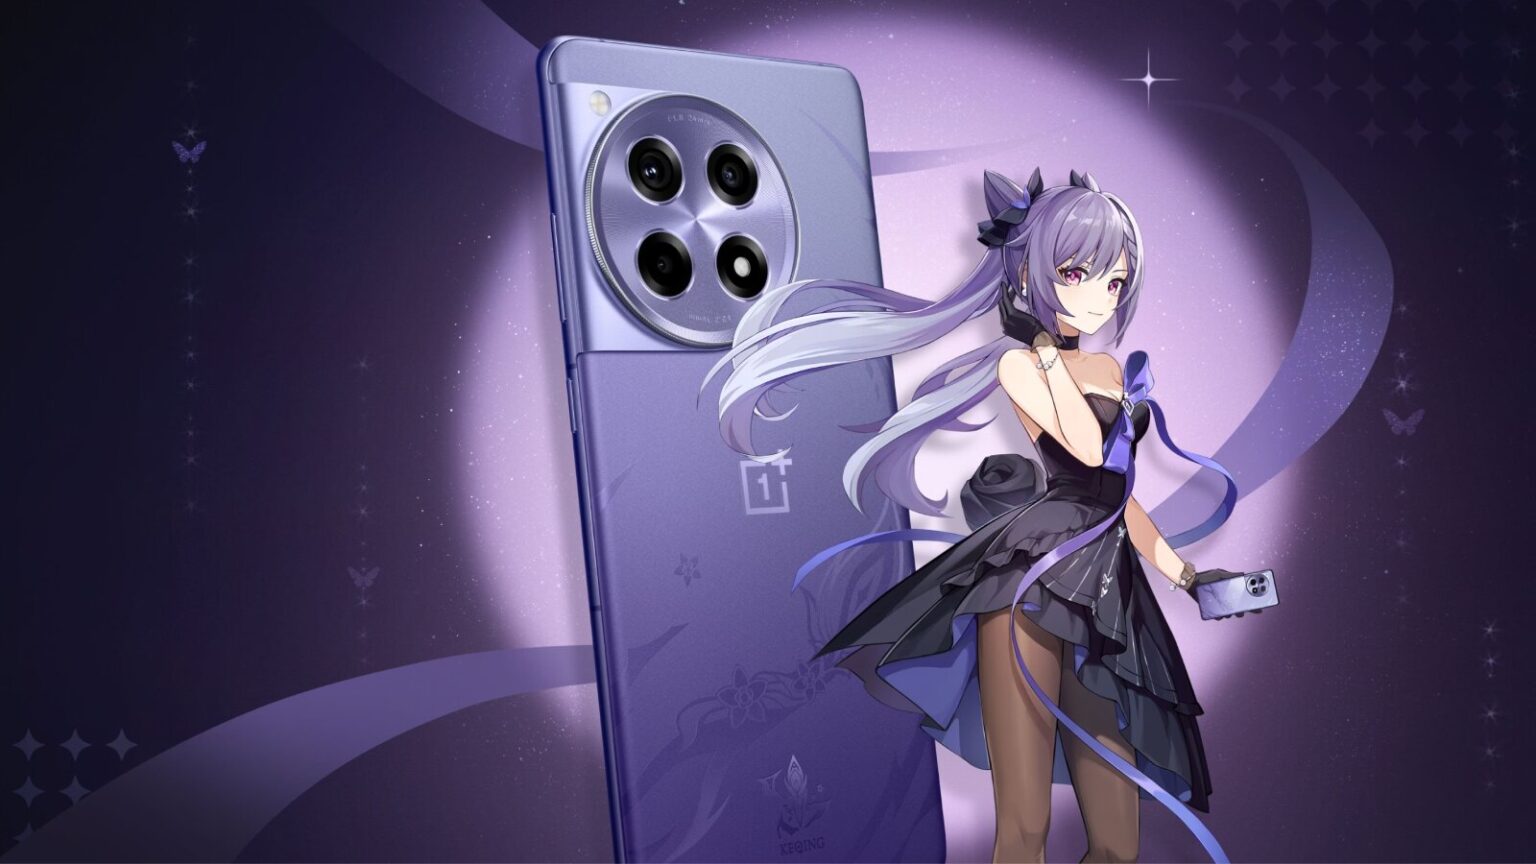 OnePlus X Genshin Impact Keqing-themed phone with anime character